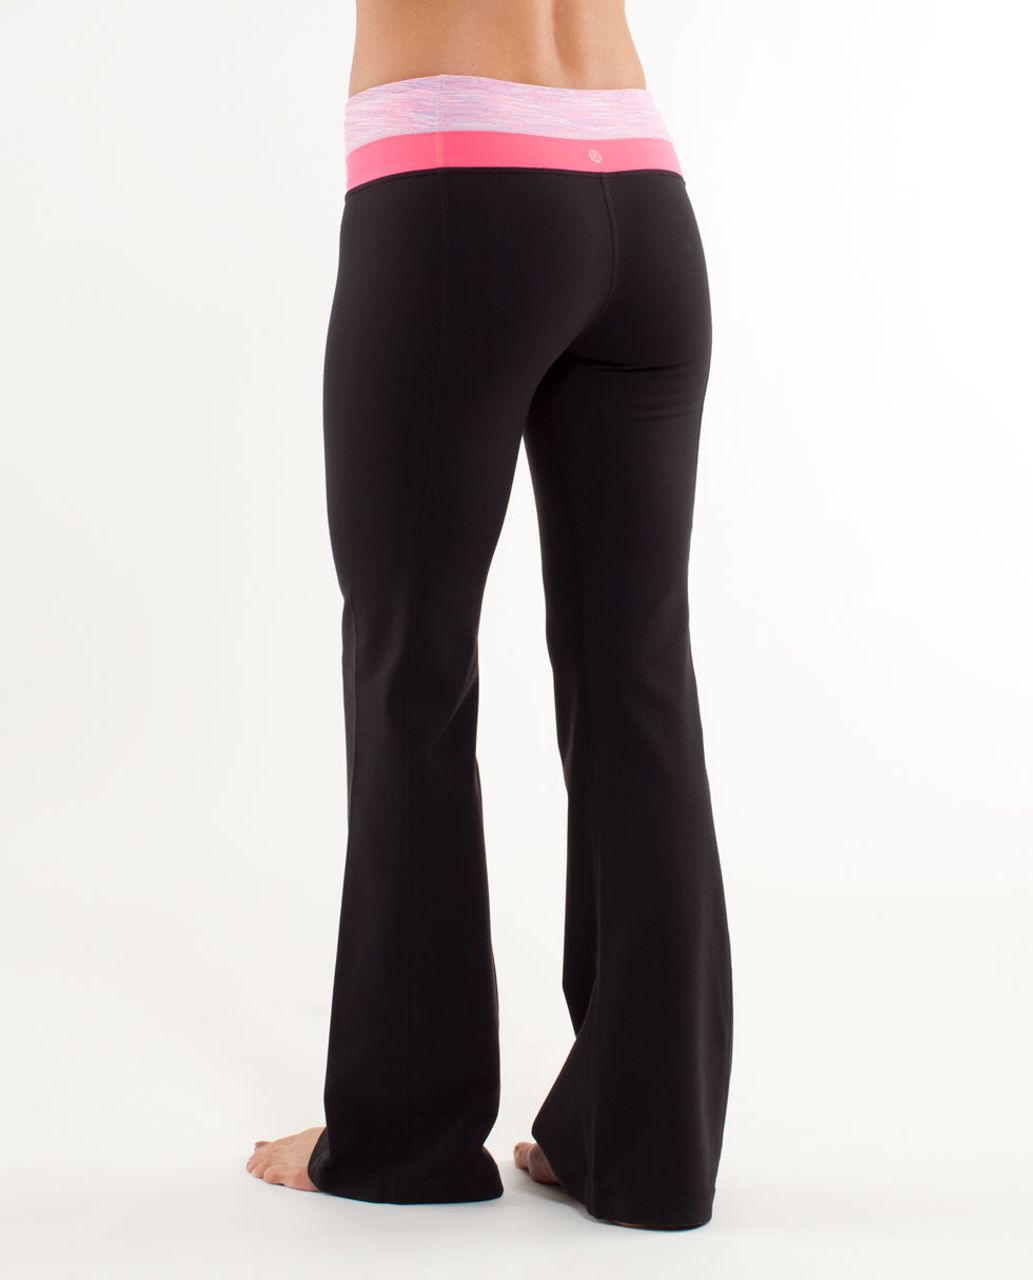 Lululemon Groove Pant (Regular) - Black /  Wee Are From Space White April Multi /  Flash